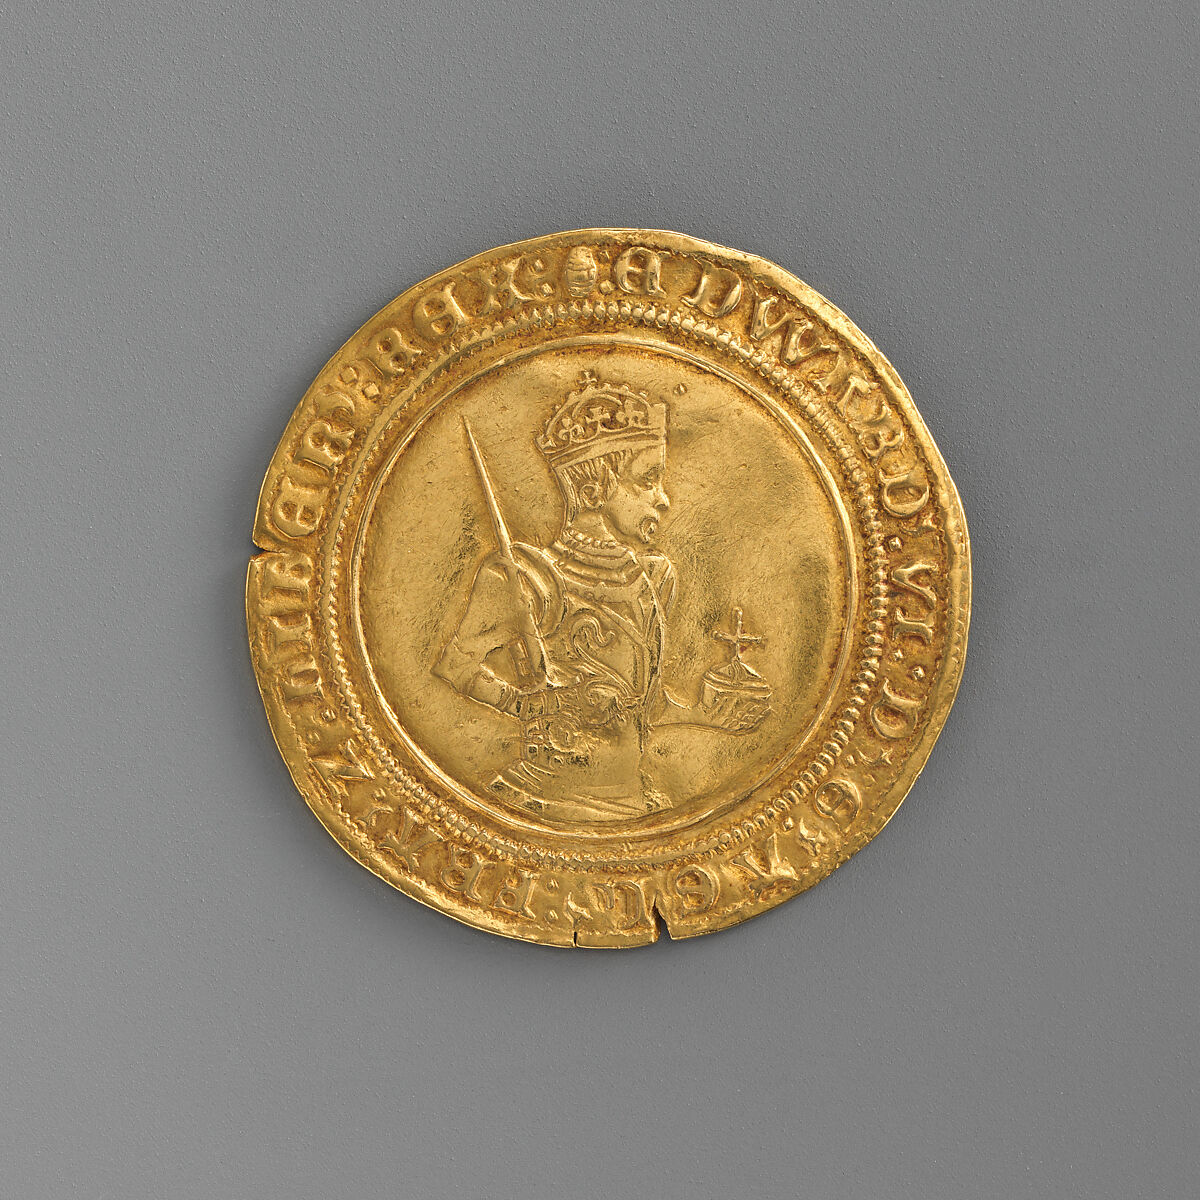 Edward VI (r. 1547–53), The Royal Mint (London, founded 886 CE ), Gold, British 